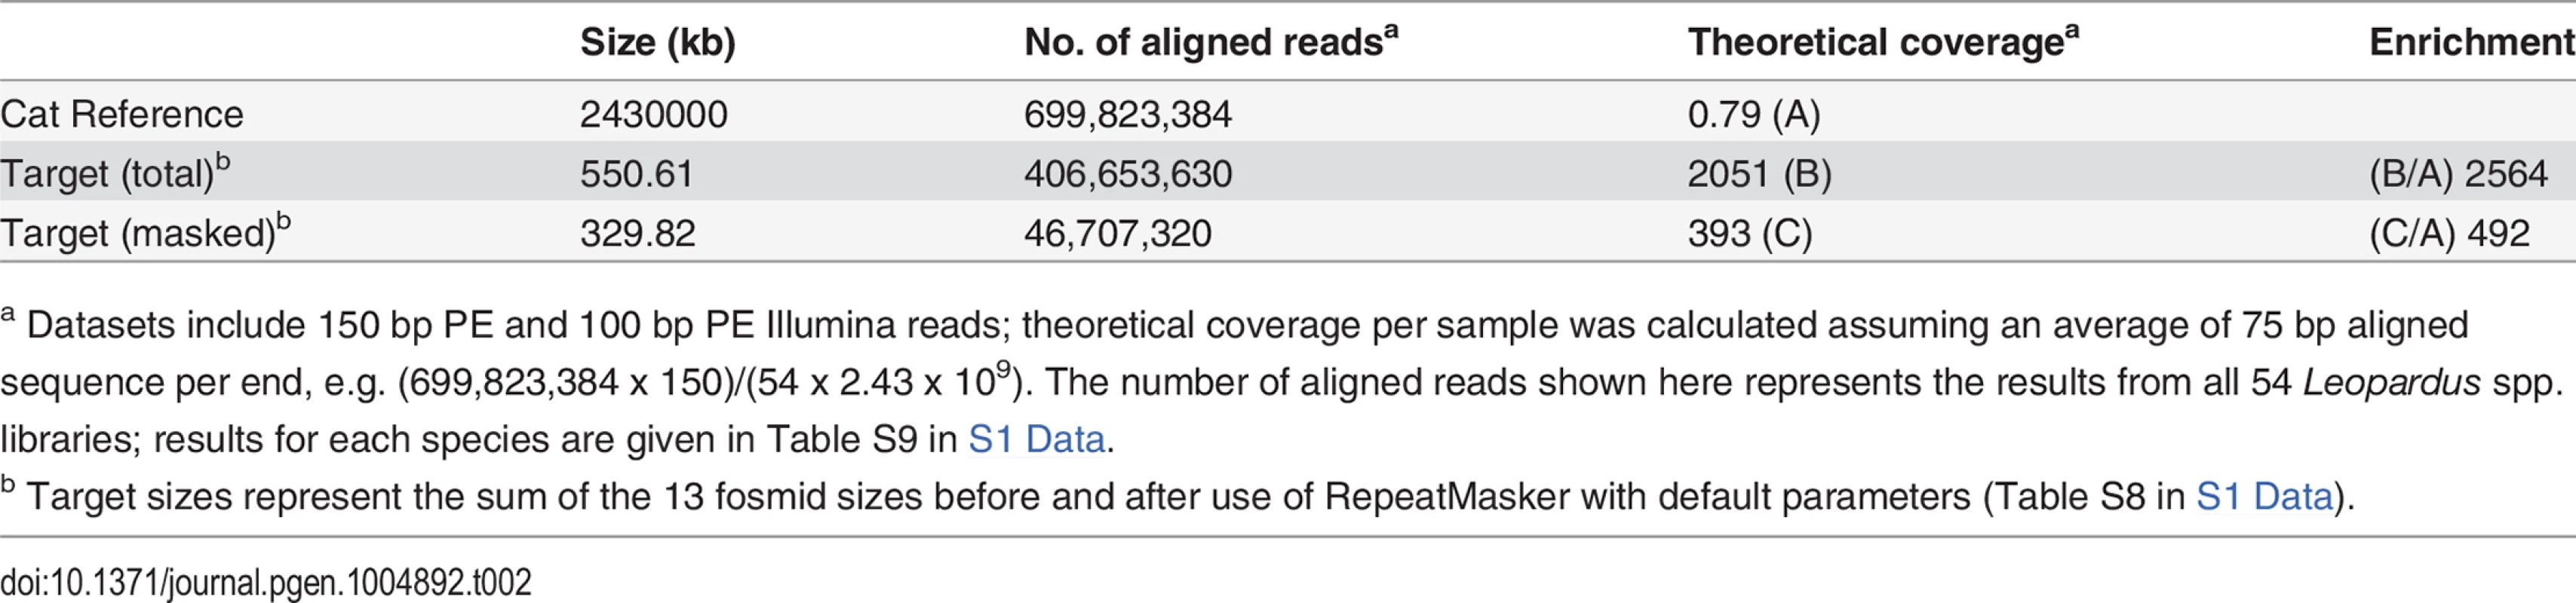 Alignment coverage summary for CATCH-Seq libraries.